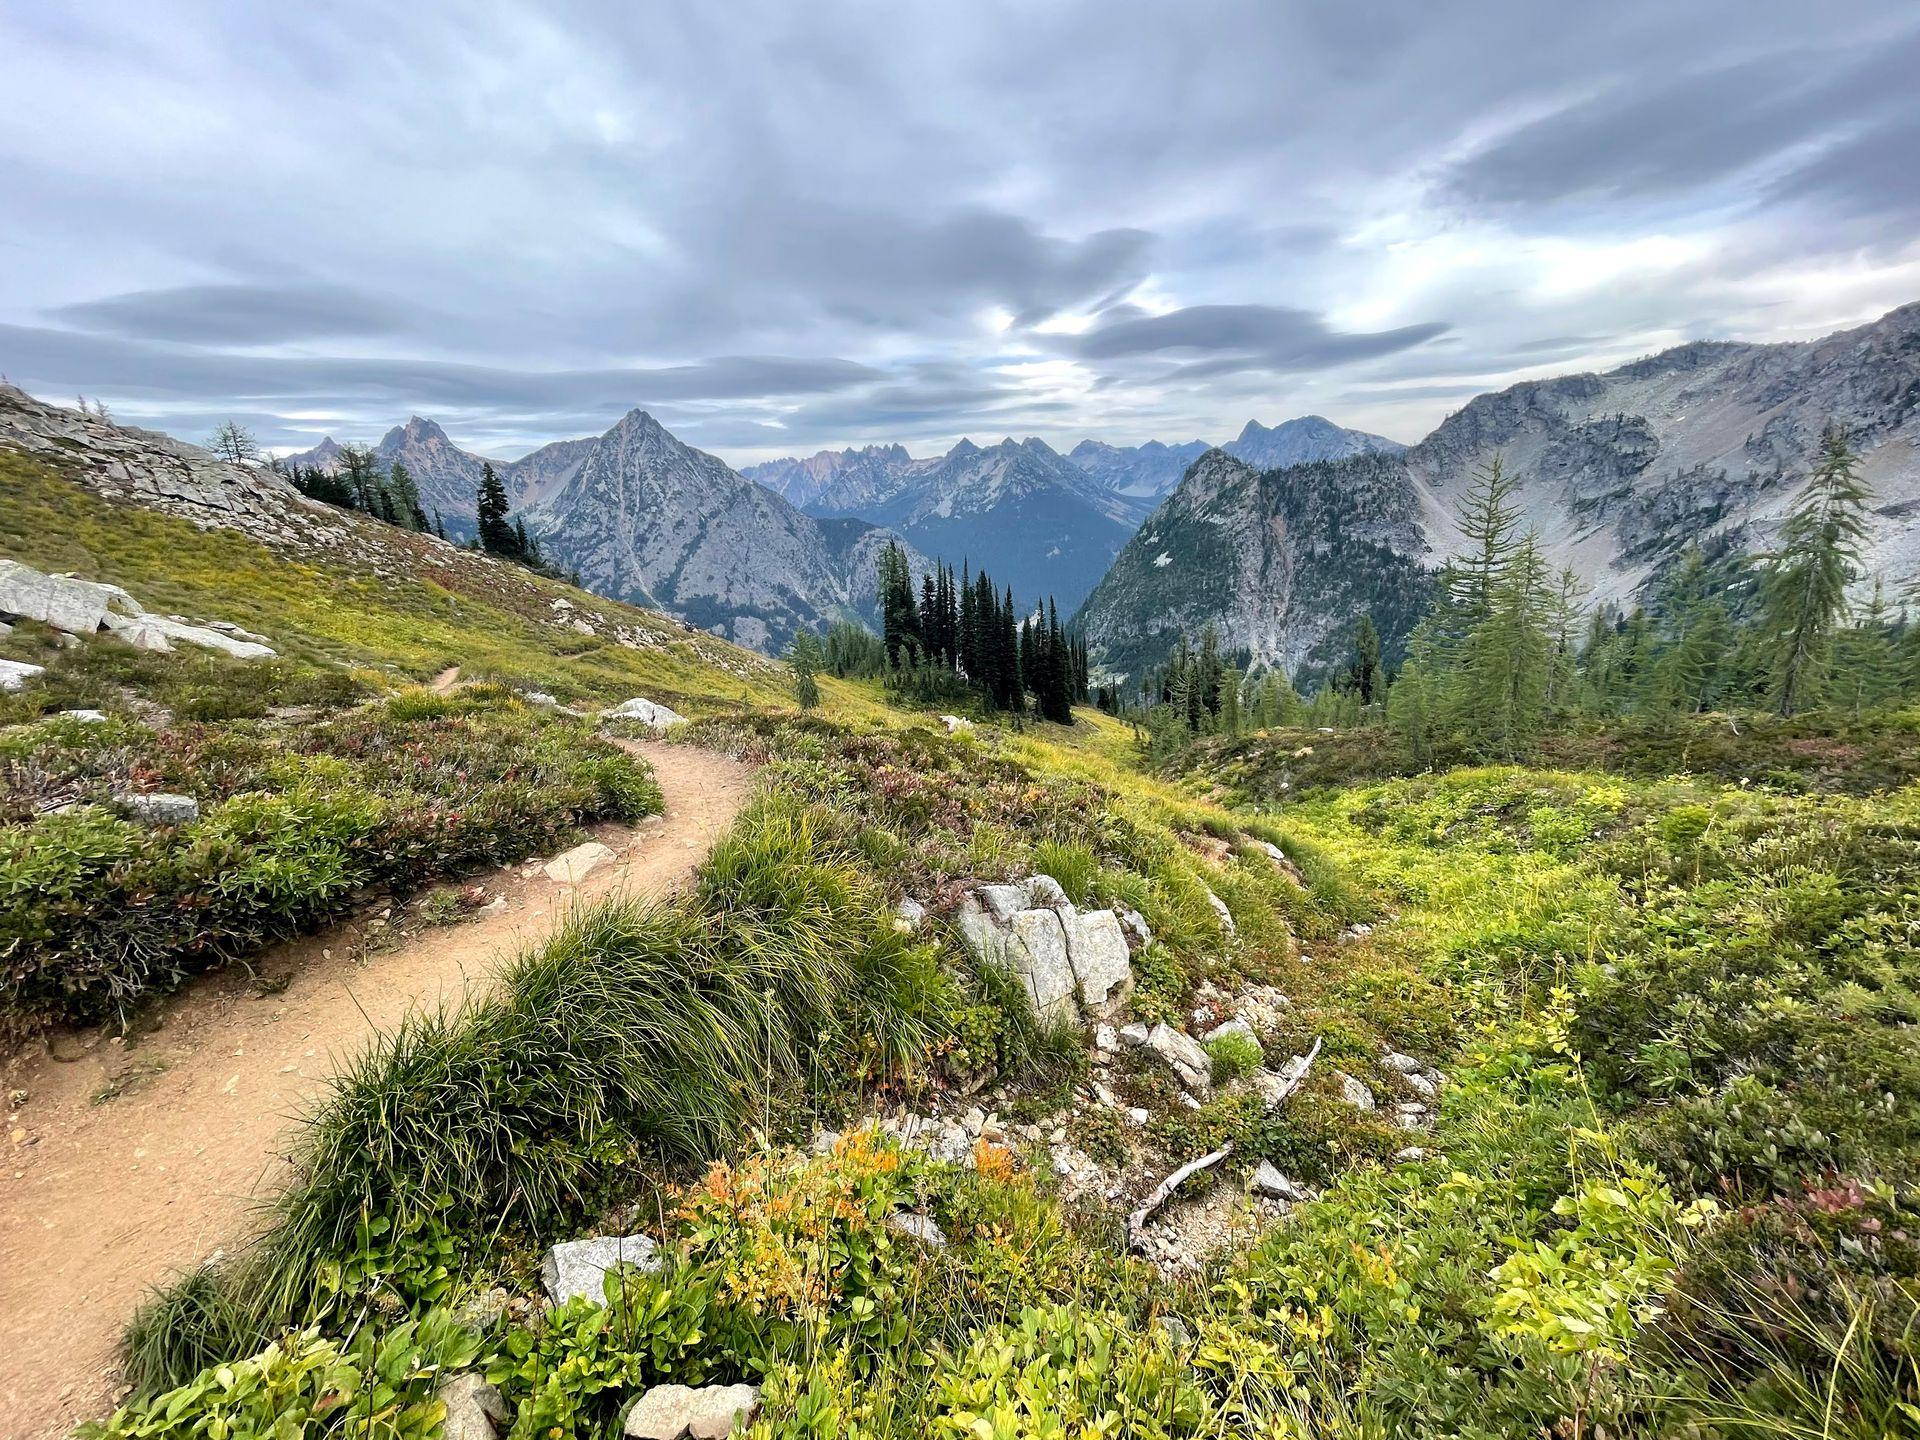 A view of mountains, greenery and a trail in North Cascades National Park in Washington.